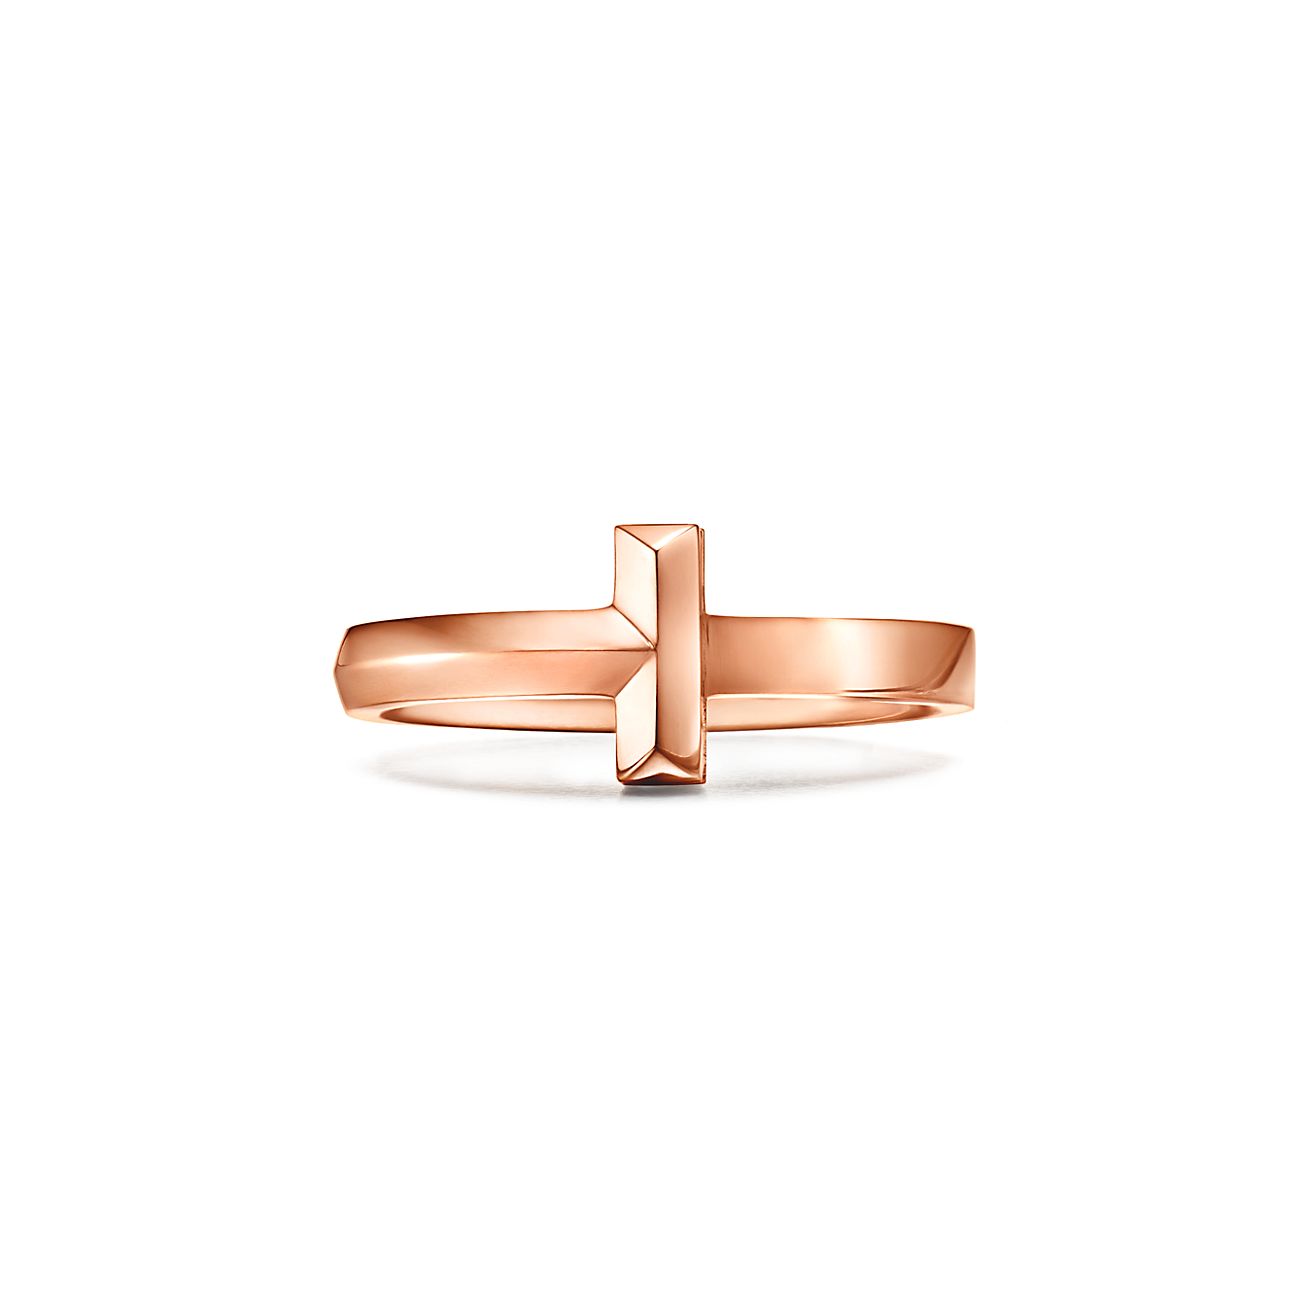 tiffany t ring dupe